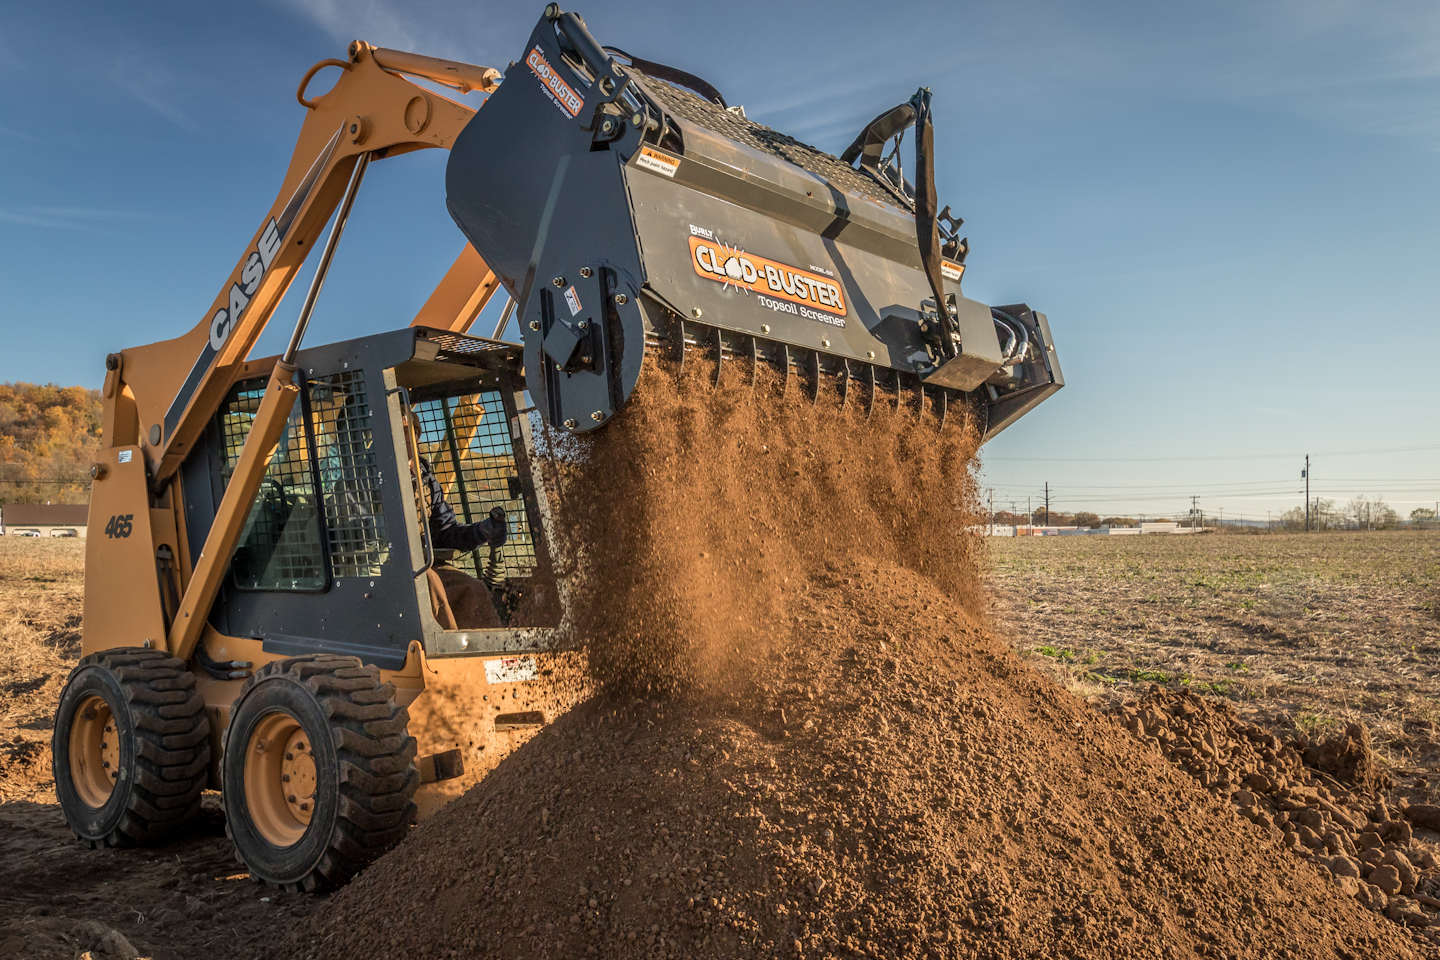 Clod-buster Topsoil Screener from Burly Attachments